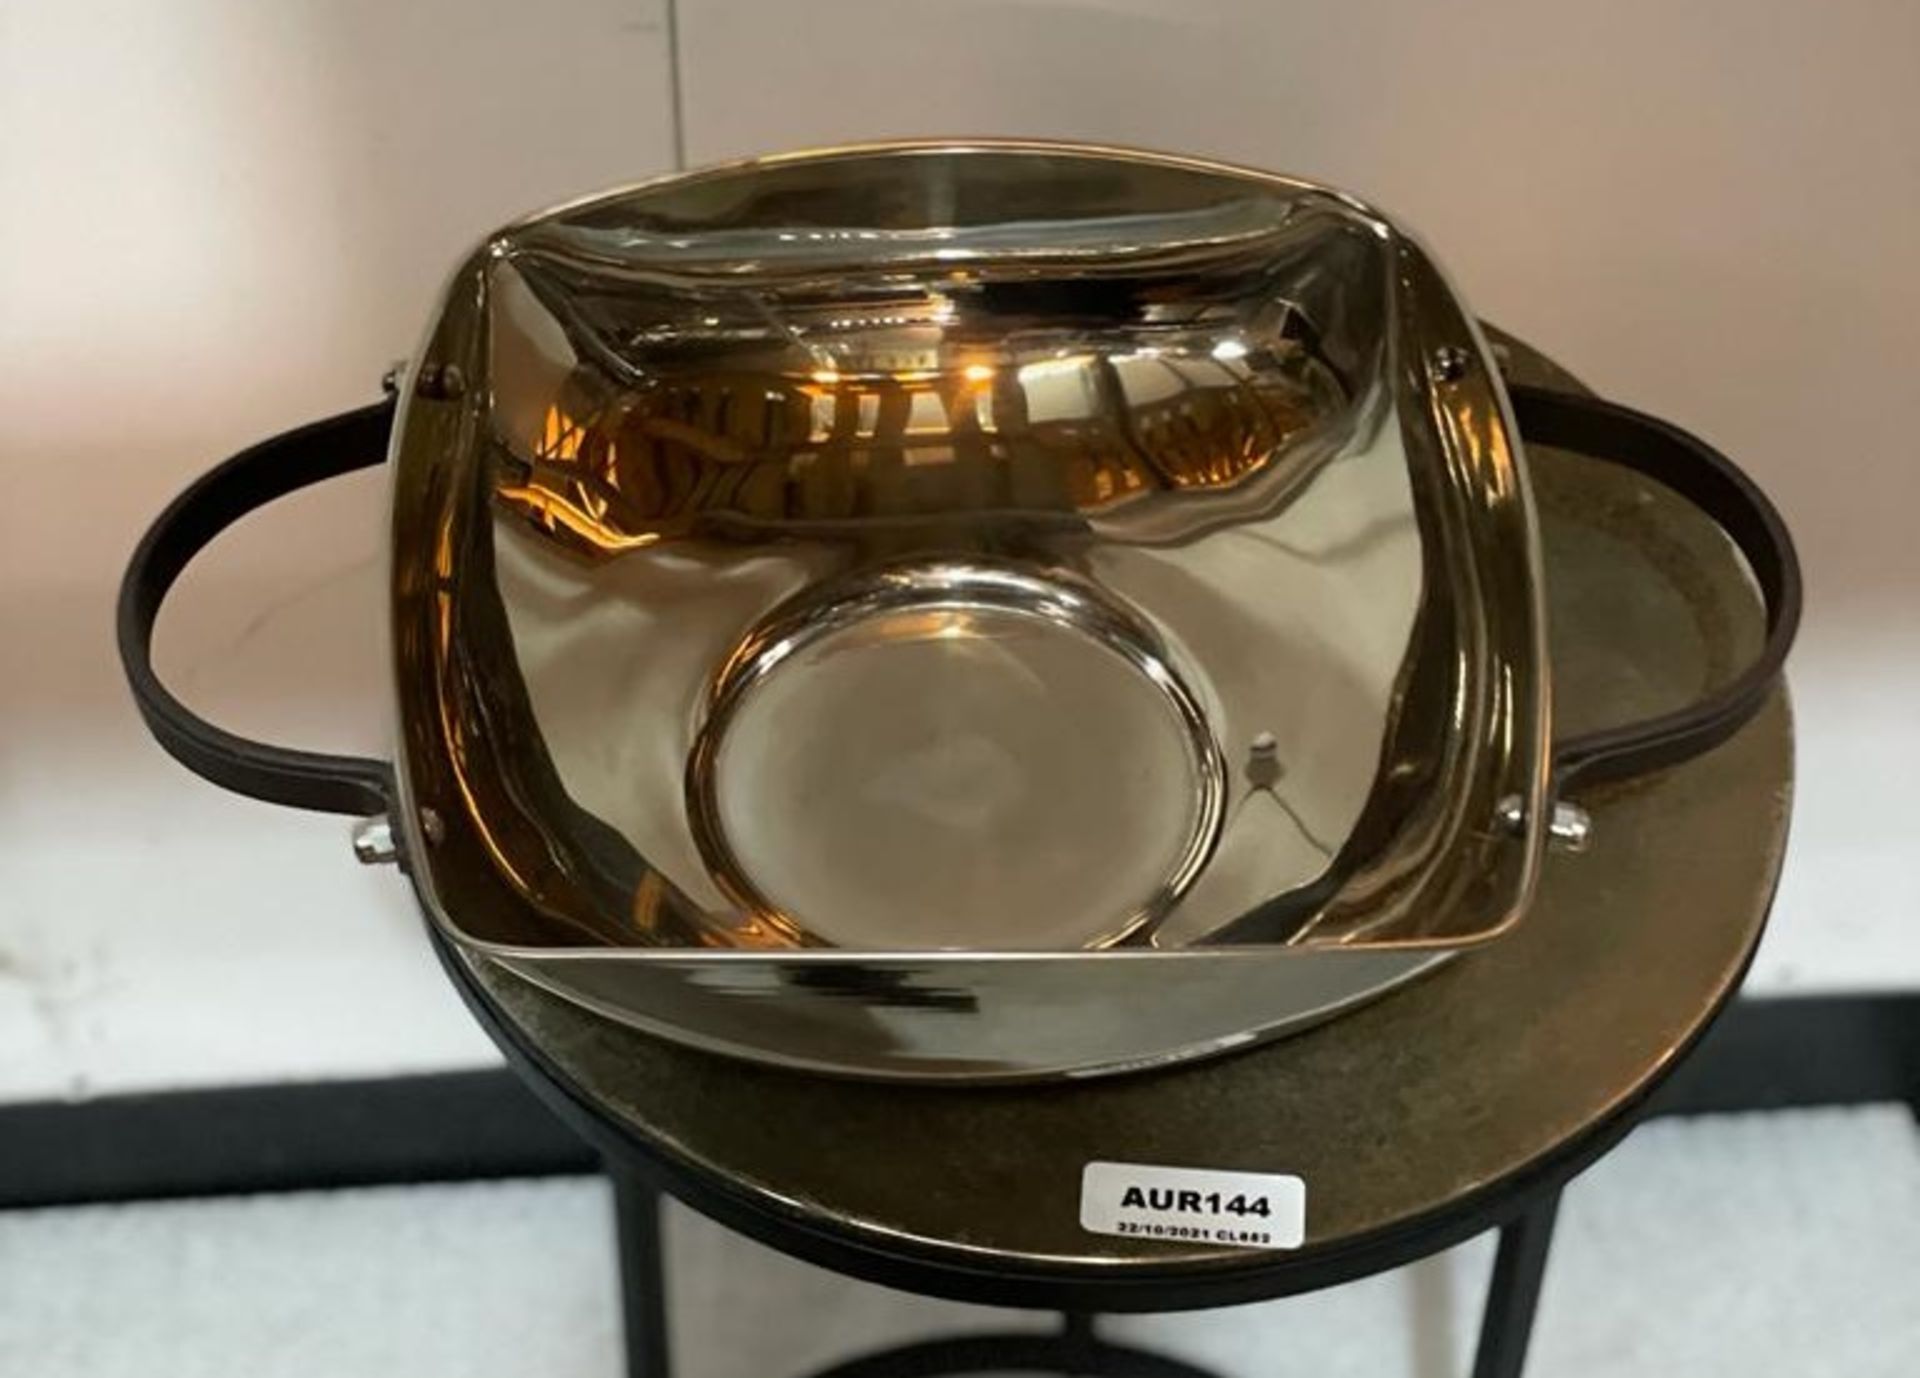 1 x Stainless Steel Bowl With Fabric Handles  - Ref: AUR144 - CL652 - Location: Altrincham WA14 - Image 3 of 3